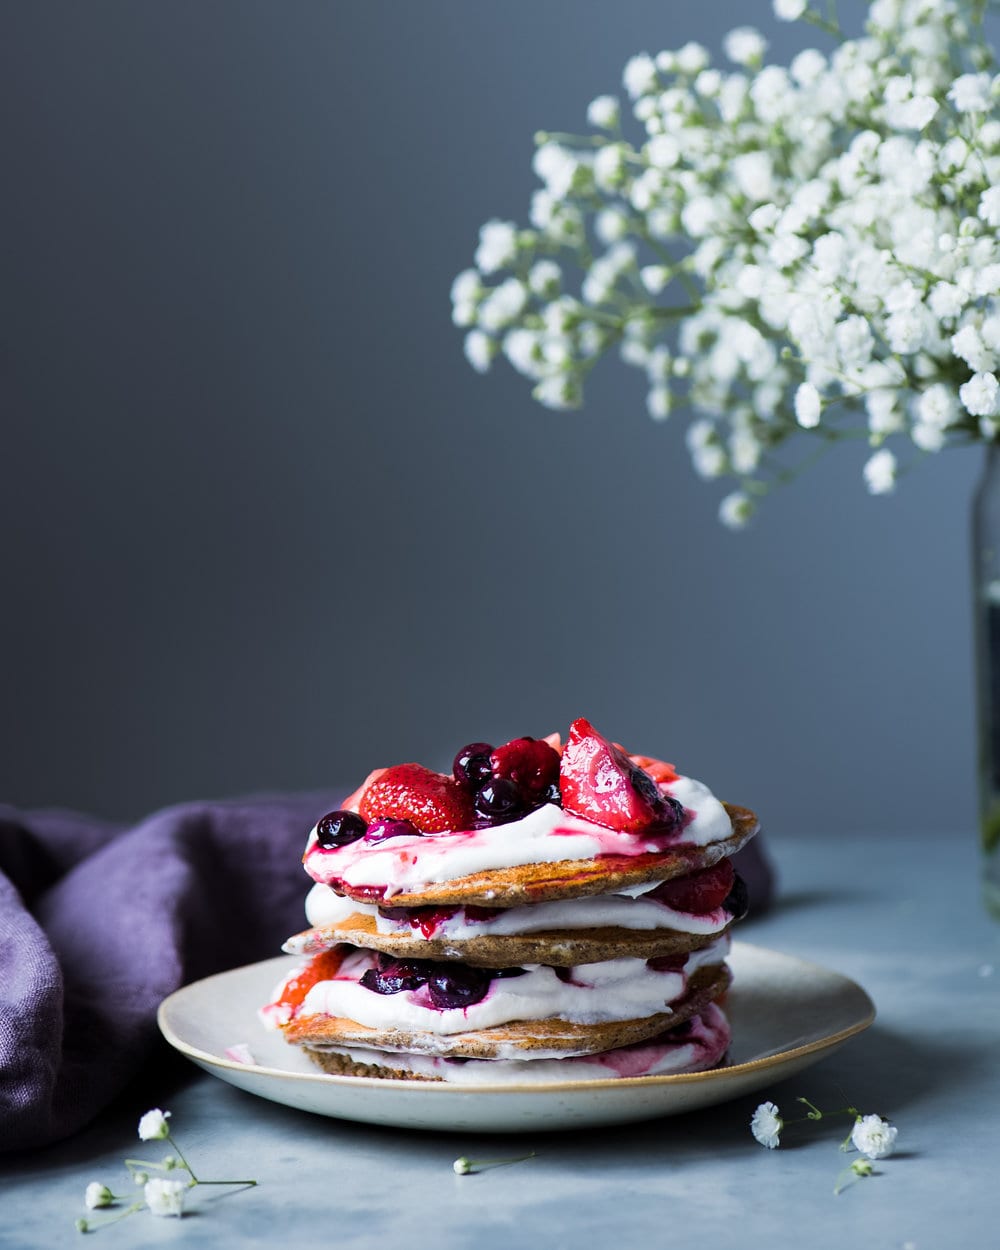 Stack of pancakes with yogurt and berries on a grey plate.